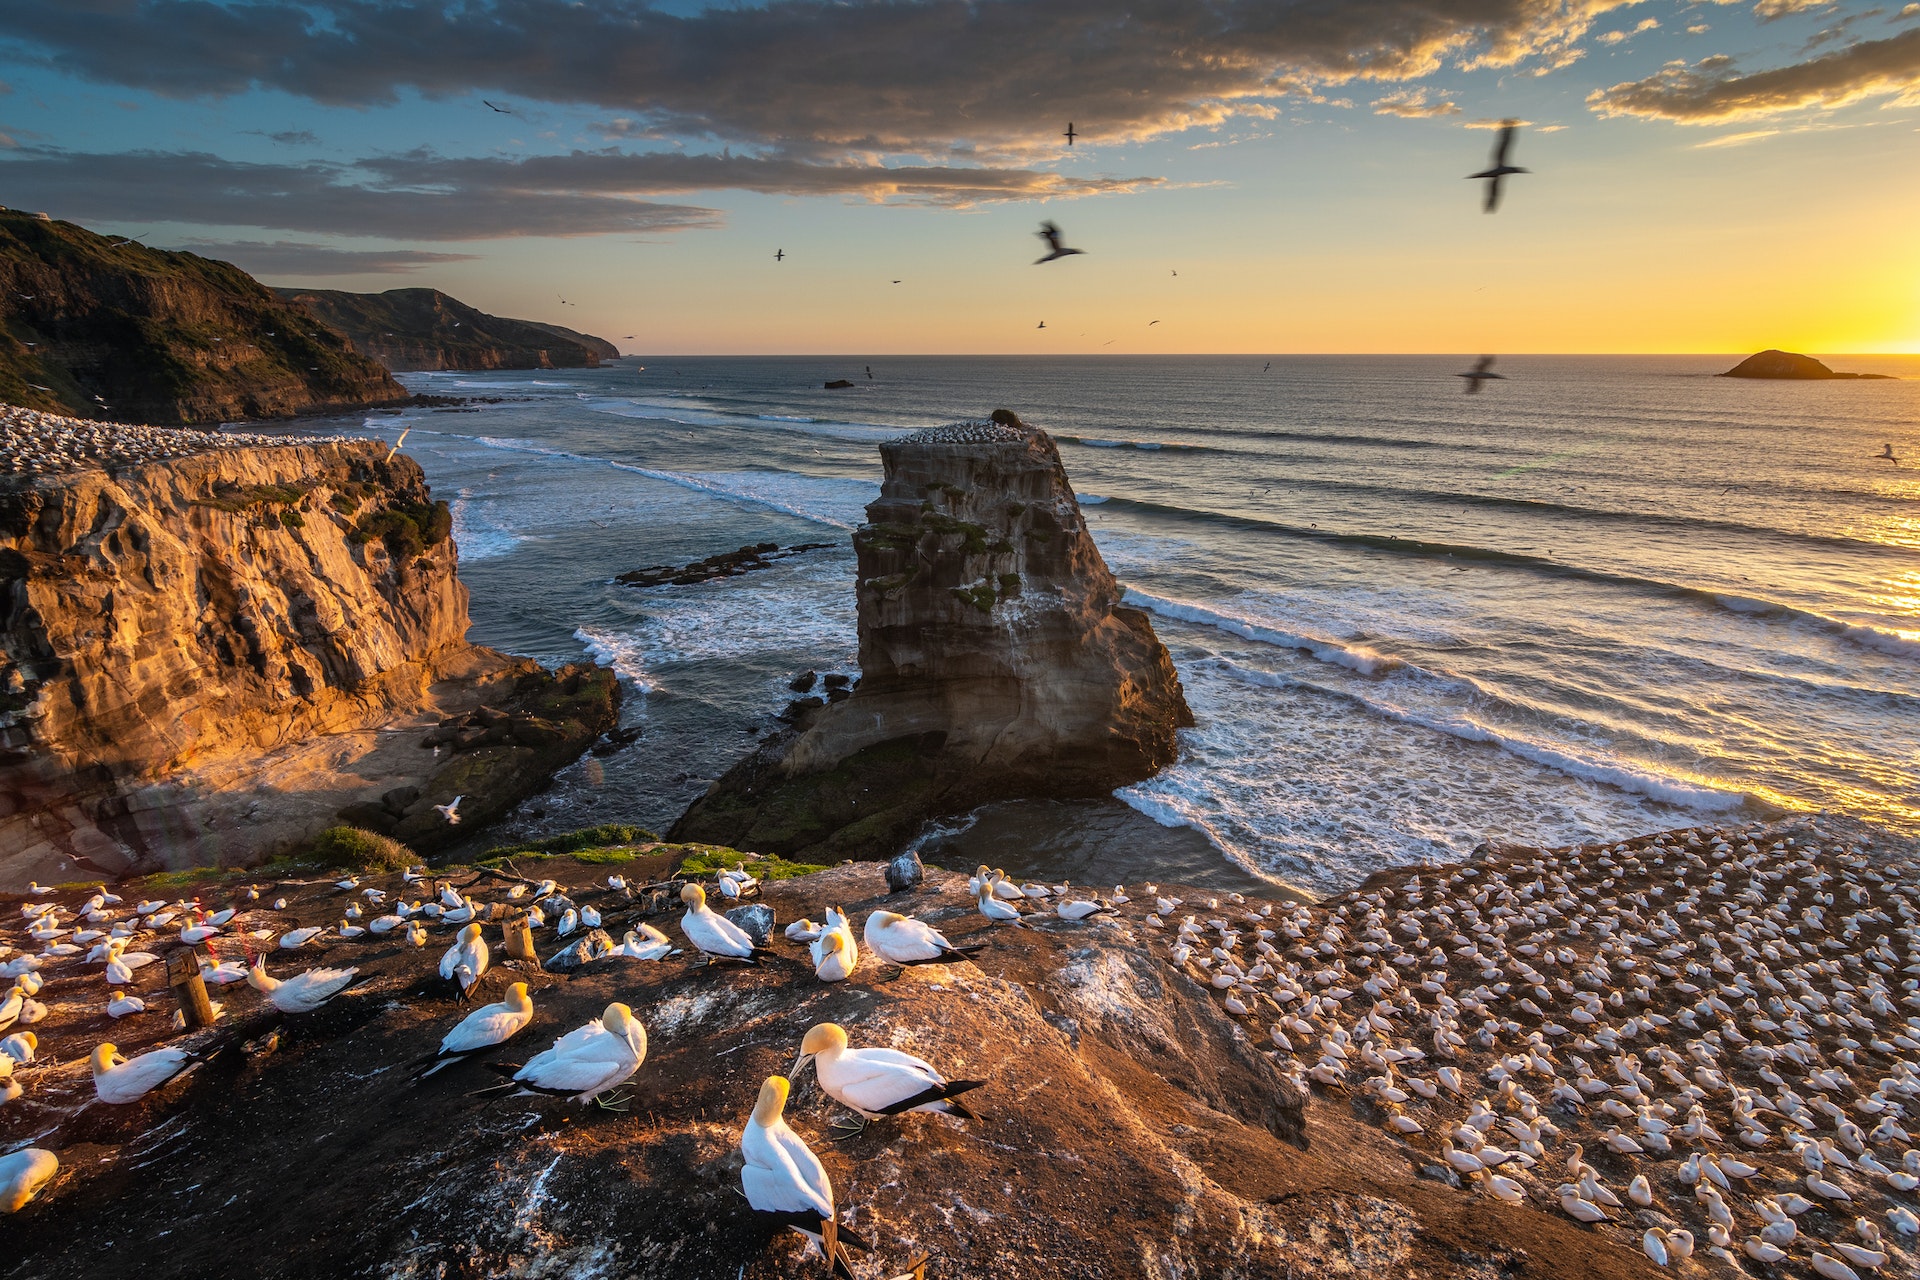 A clifftop at sunset with nesting gannets